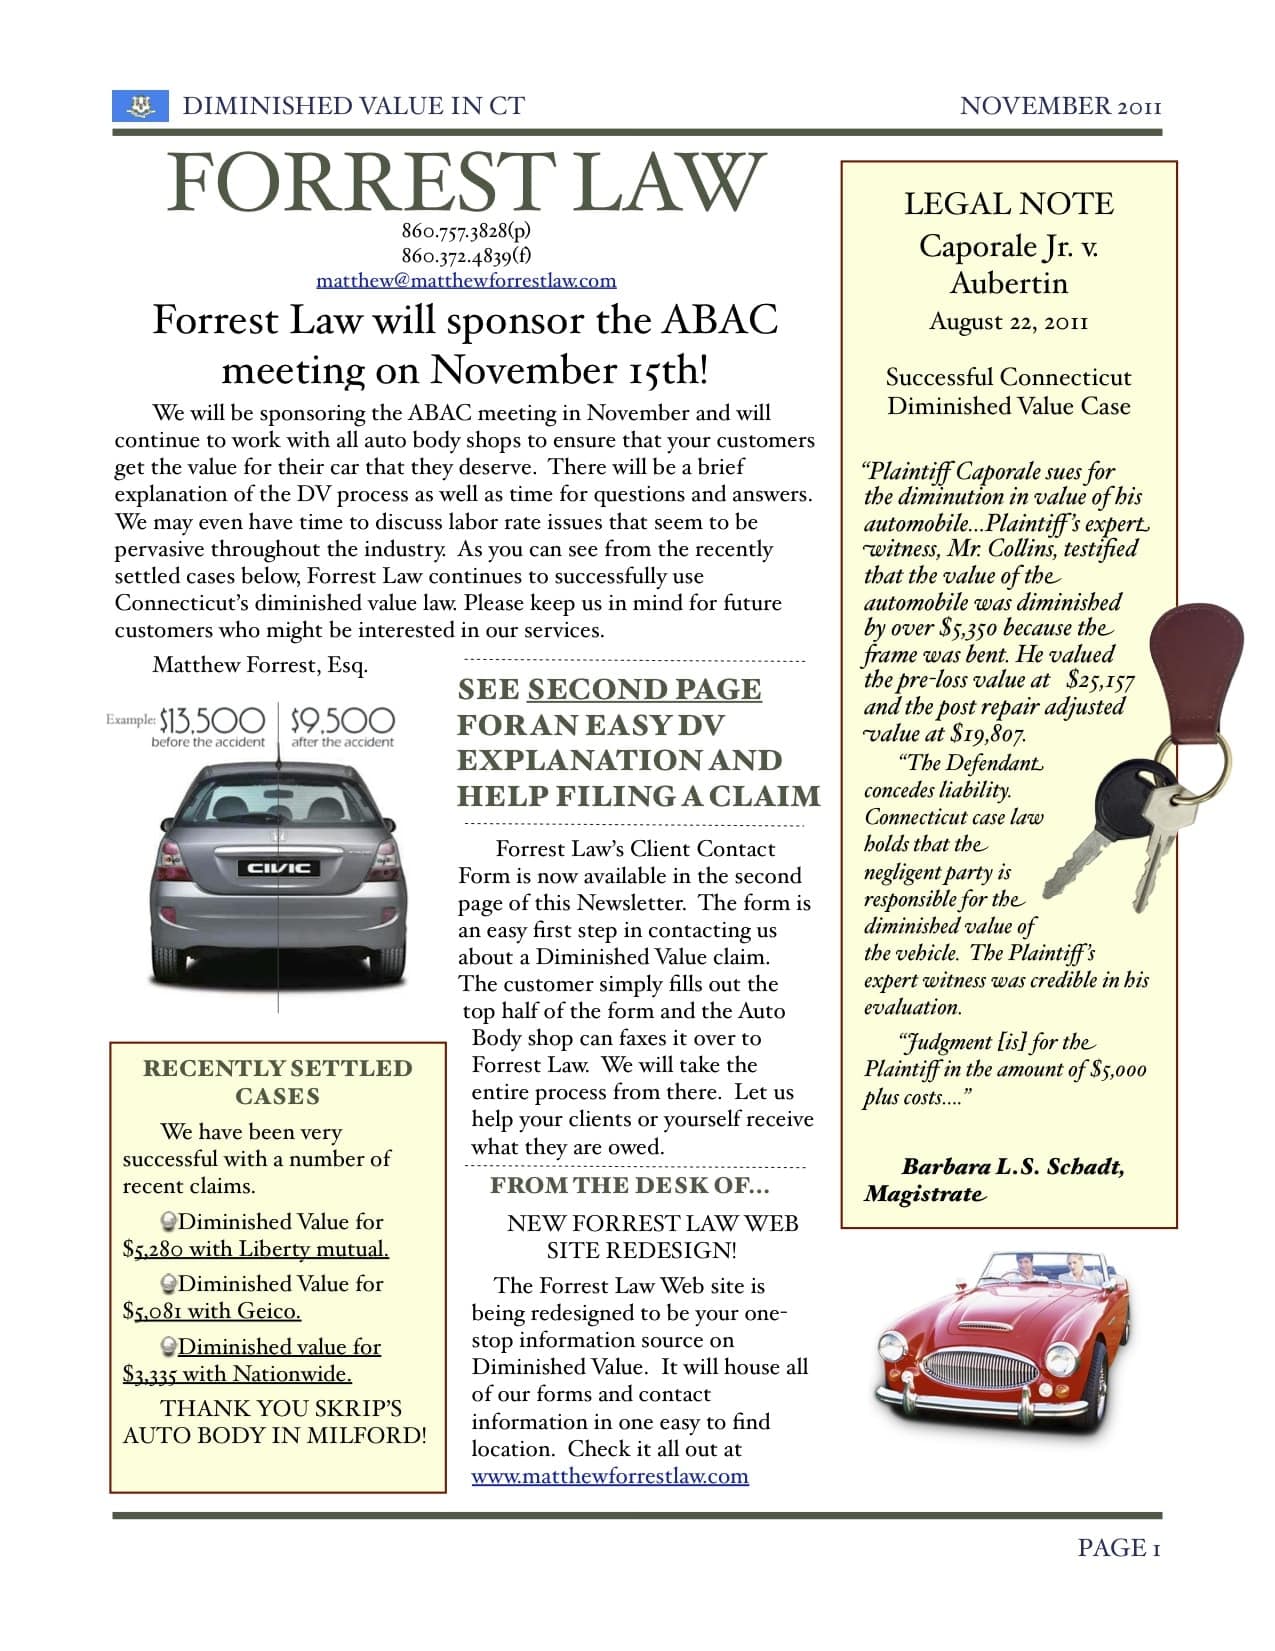 A little more about Diminished Value in Connecticut from the Forrest law Newsletter